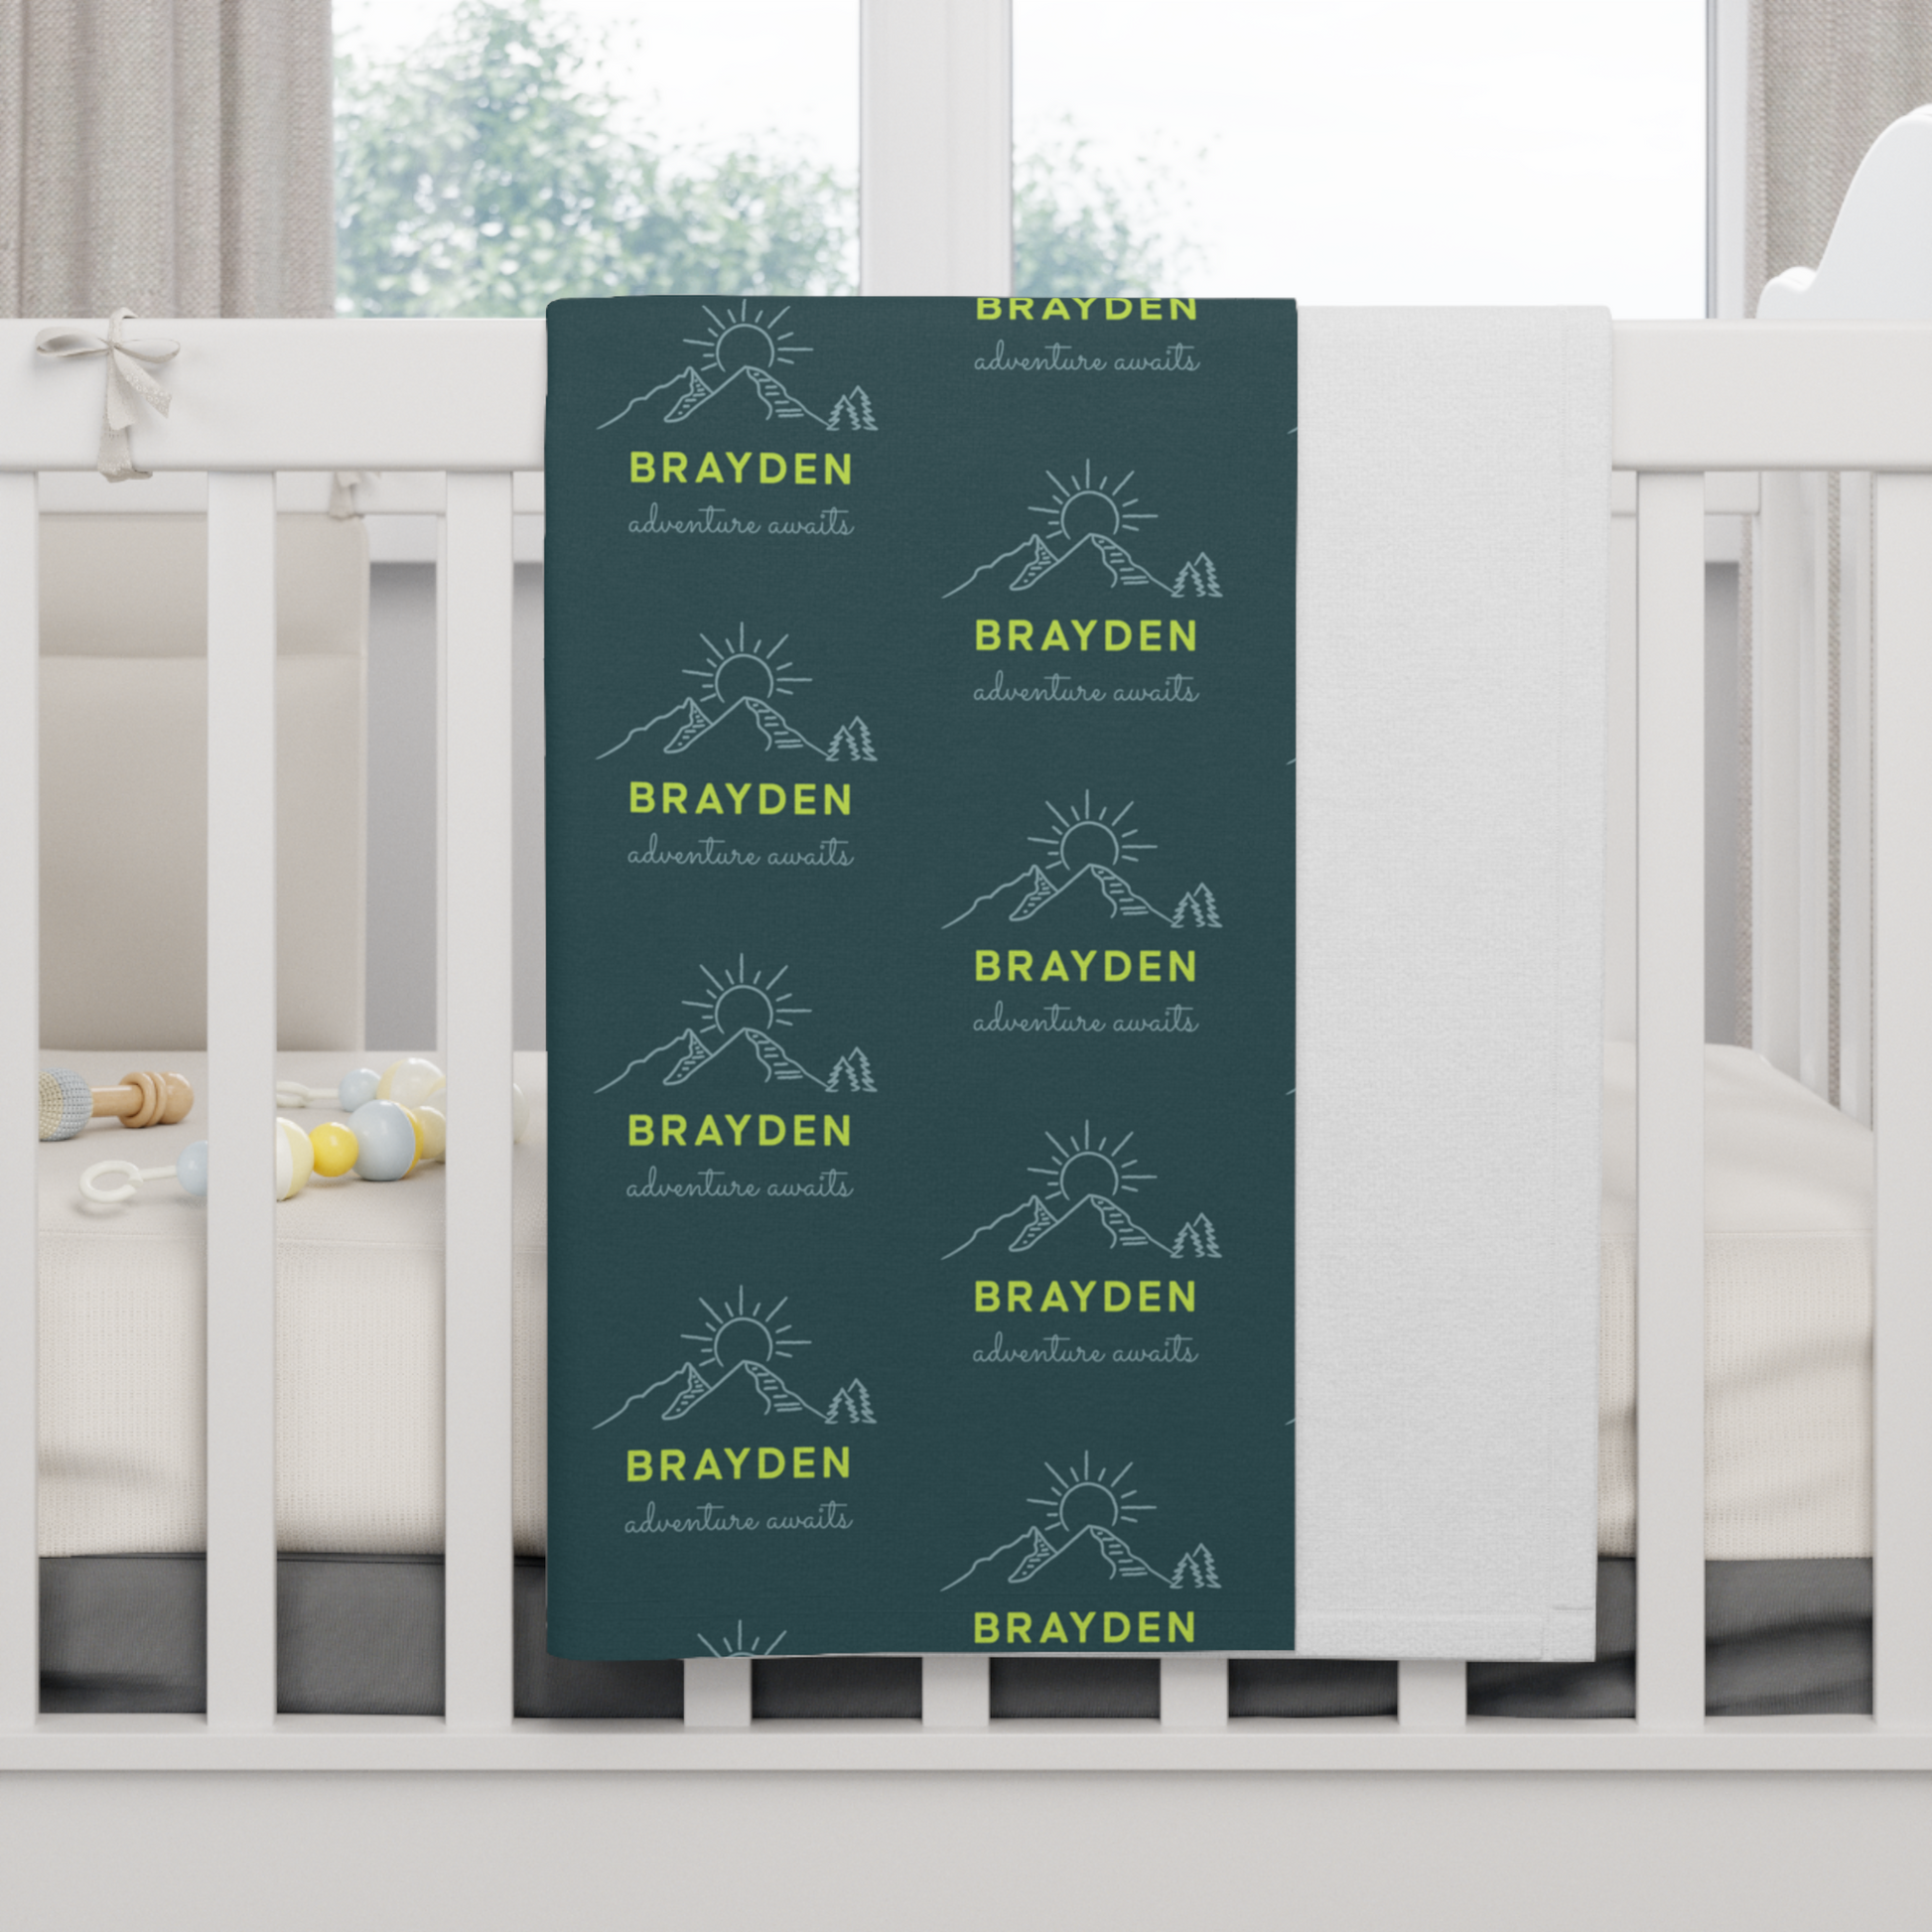 Fleece personalized baby blanket in green mountain adventure pattern hung over side of white crib with window in the background